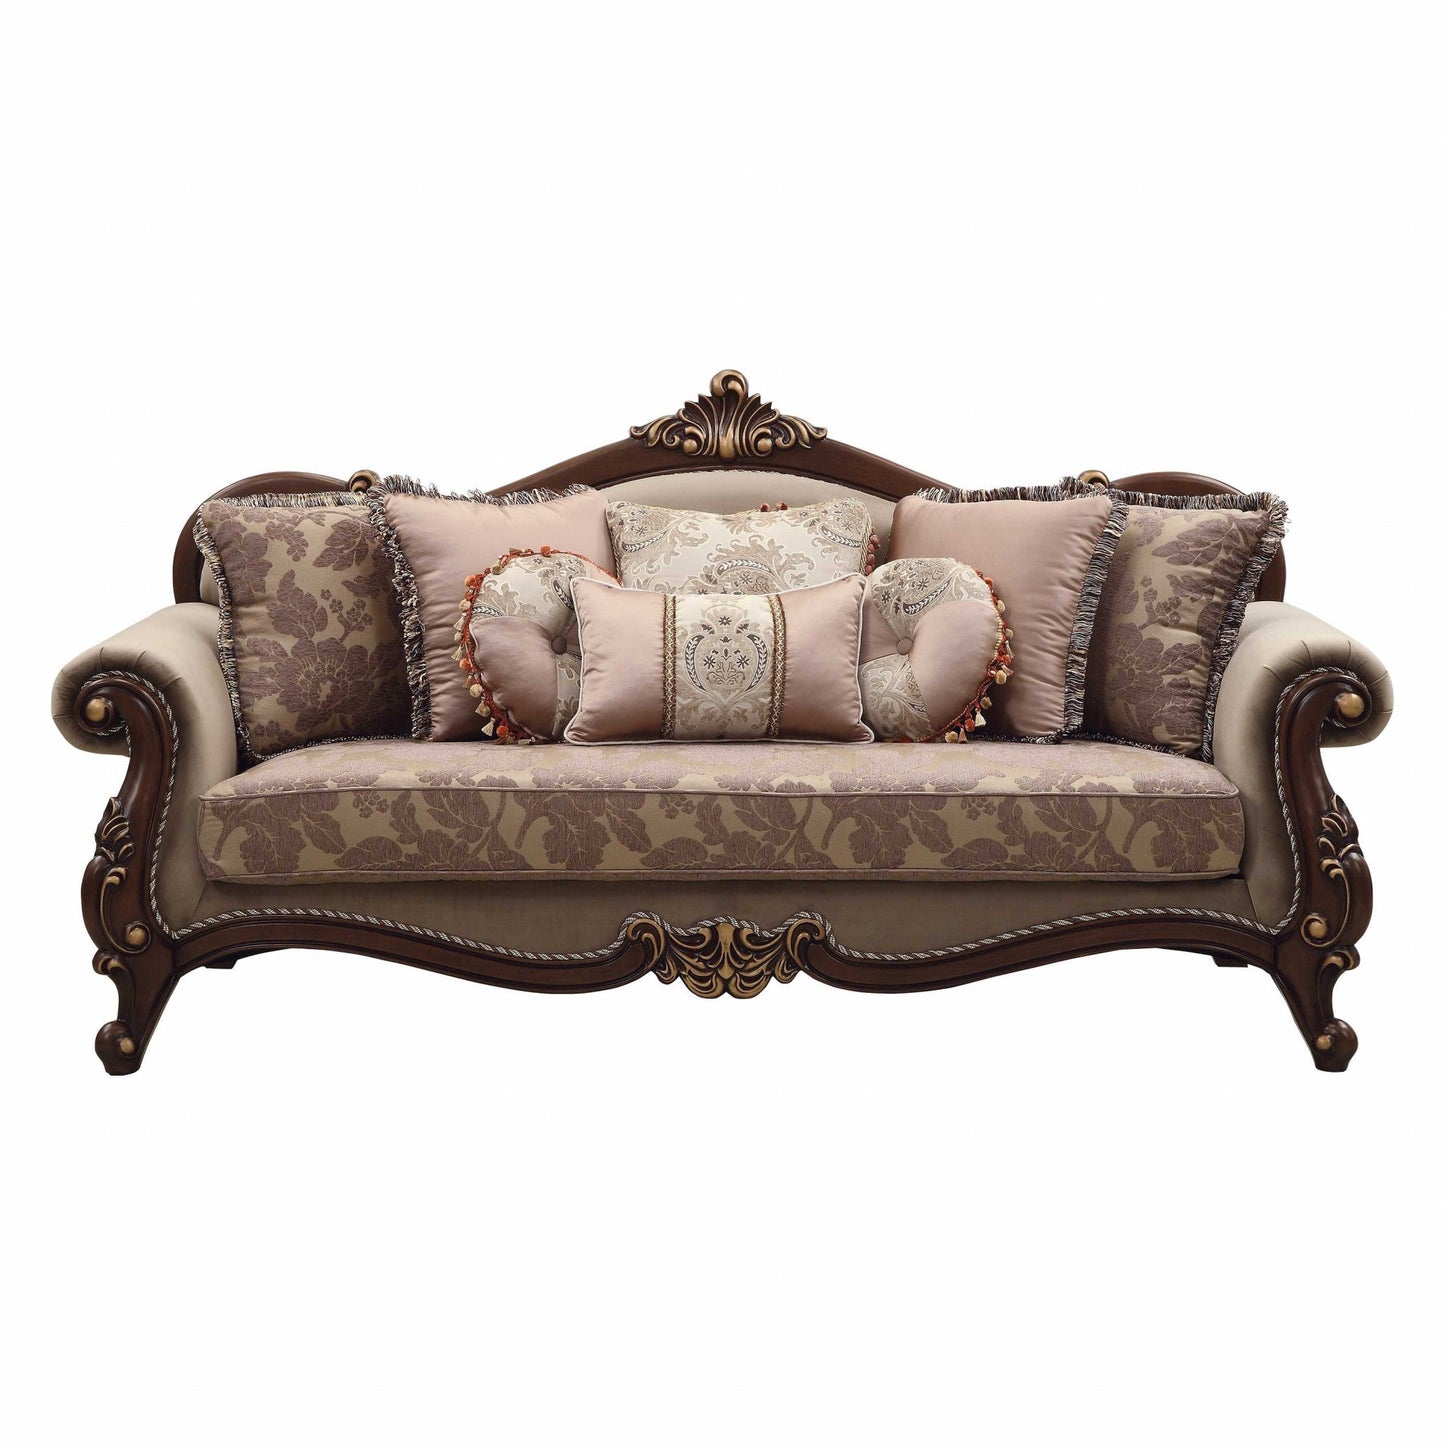 38inches X 88inches X 45inches Fabric Walnut Upholstery Wood LegTrim